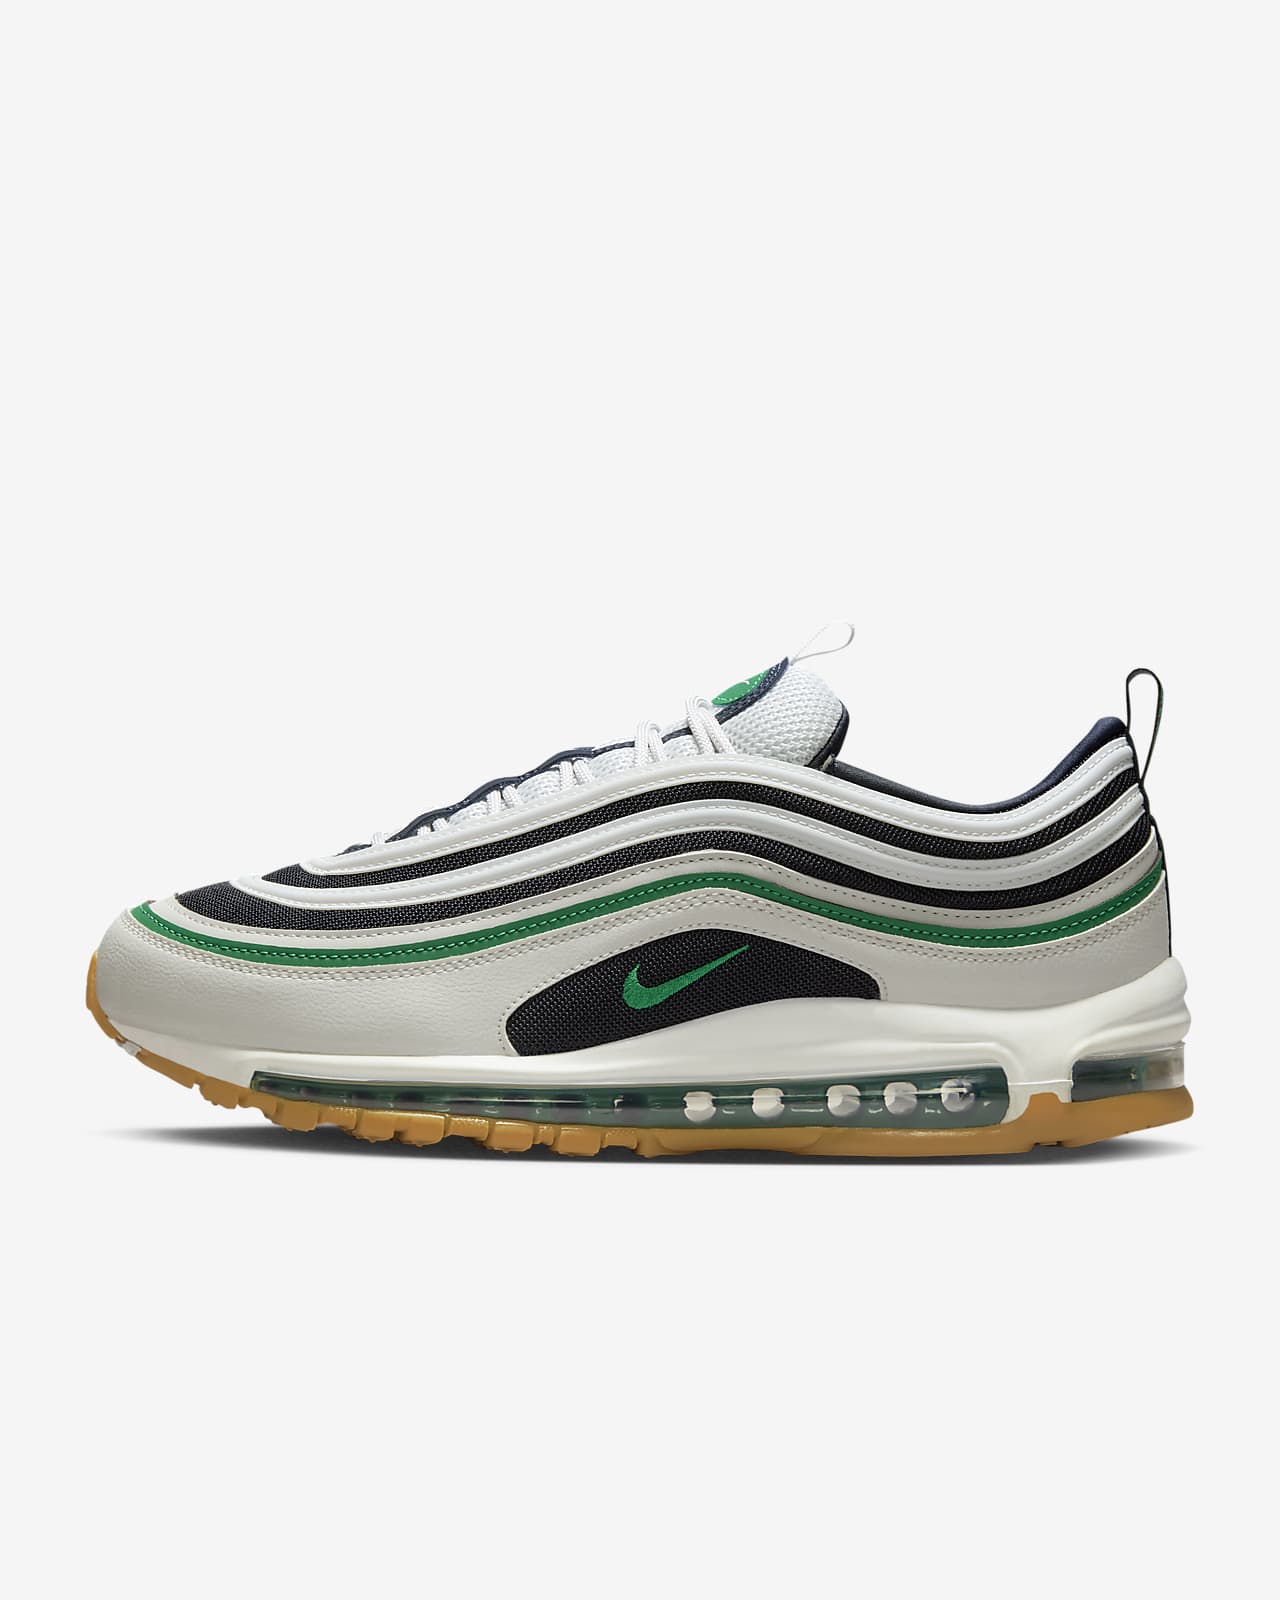 Official Images: Nike Air Max 97 Barely Rose •